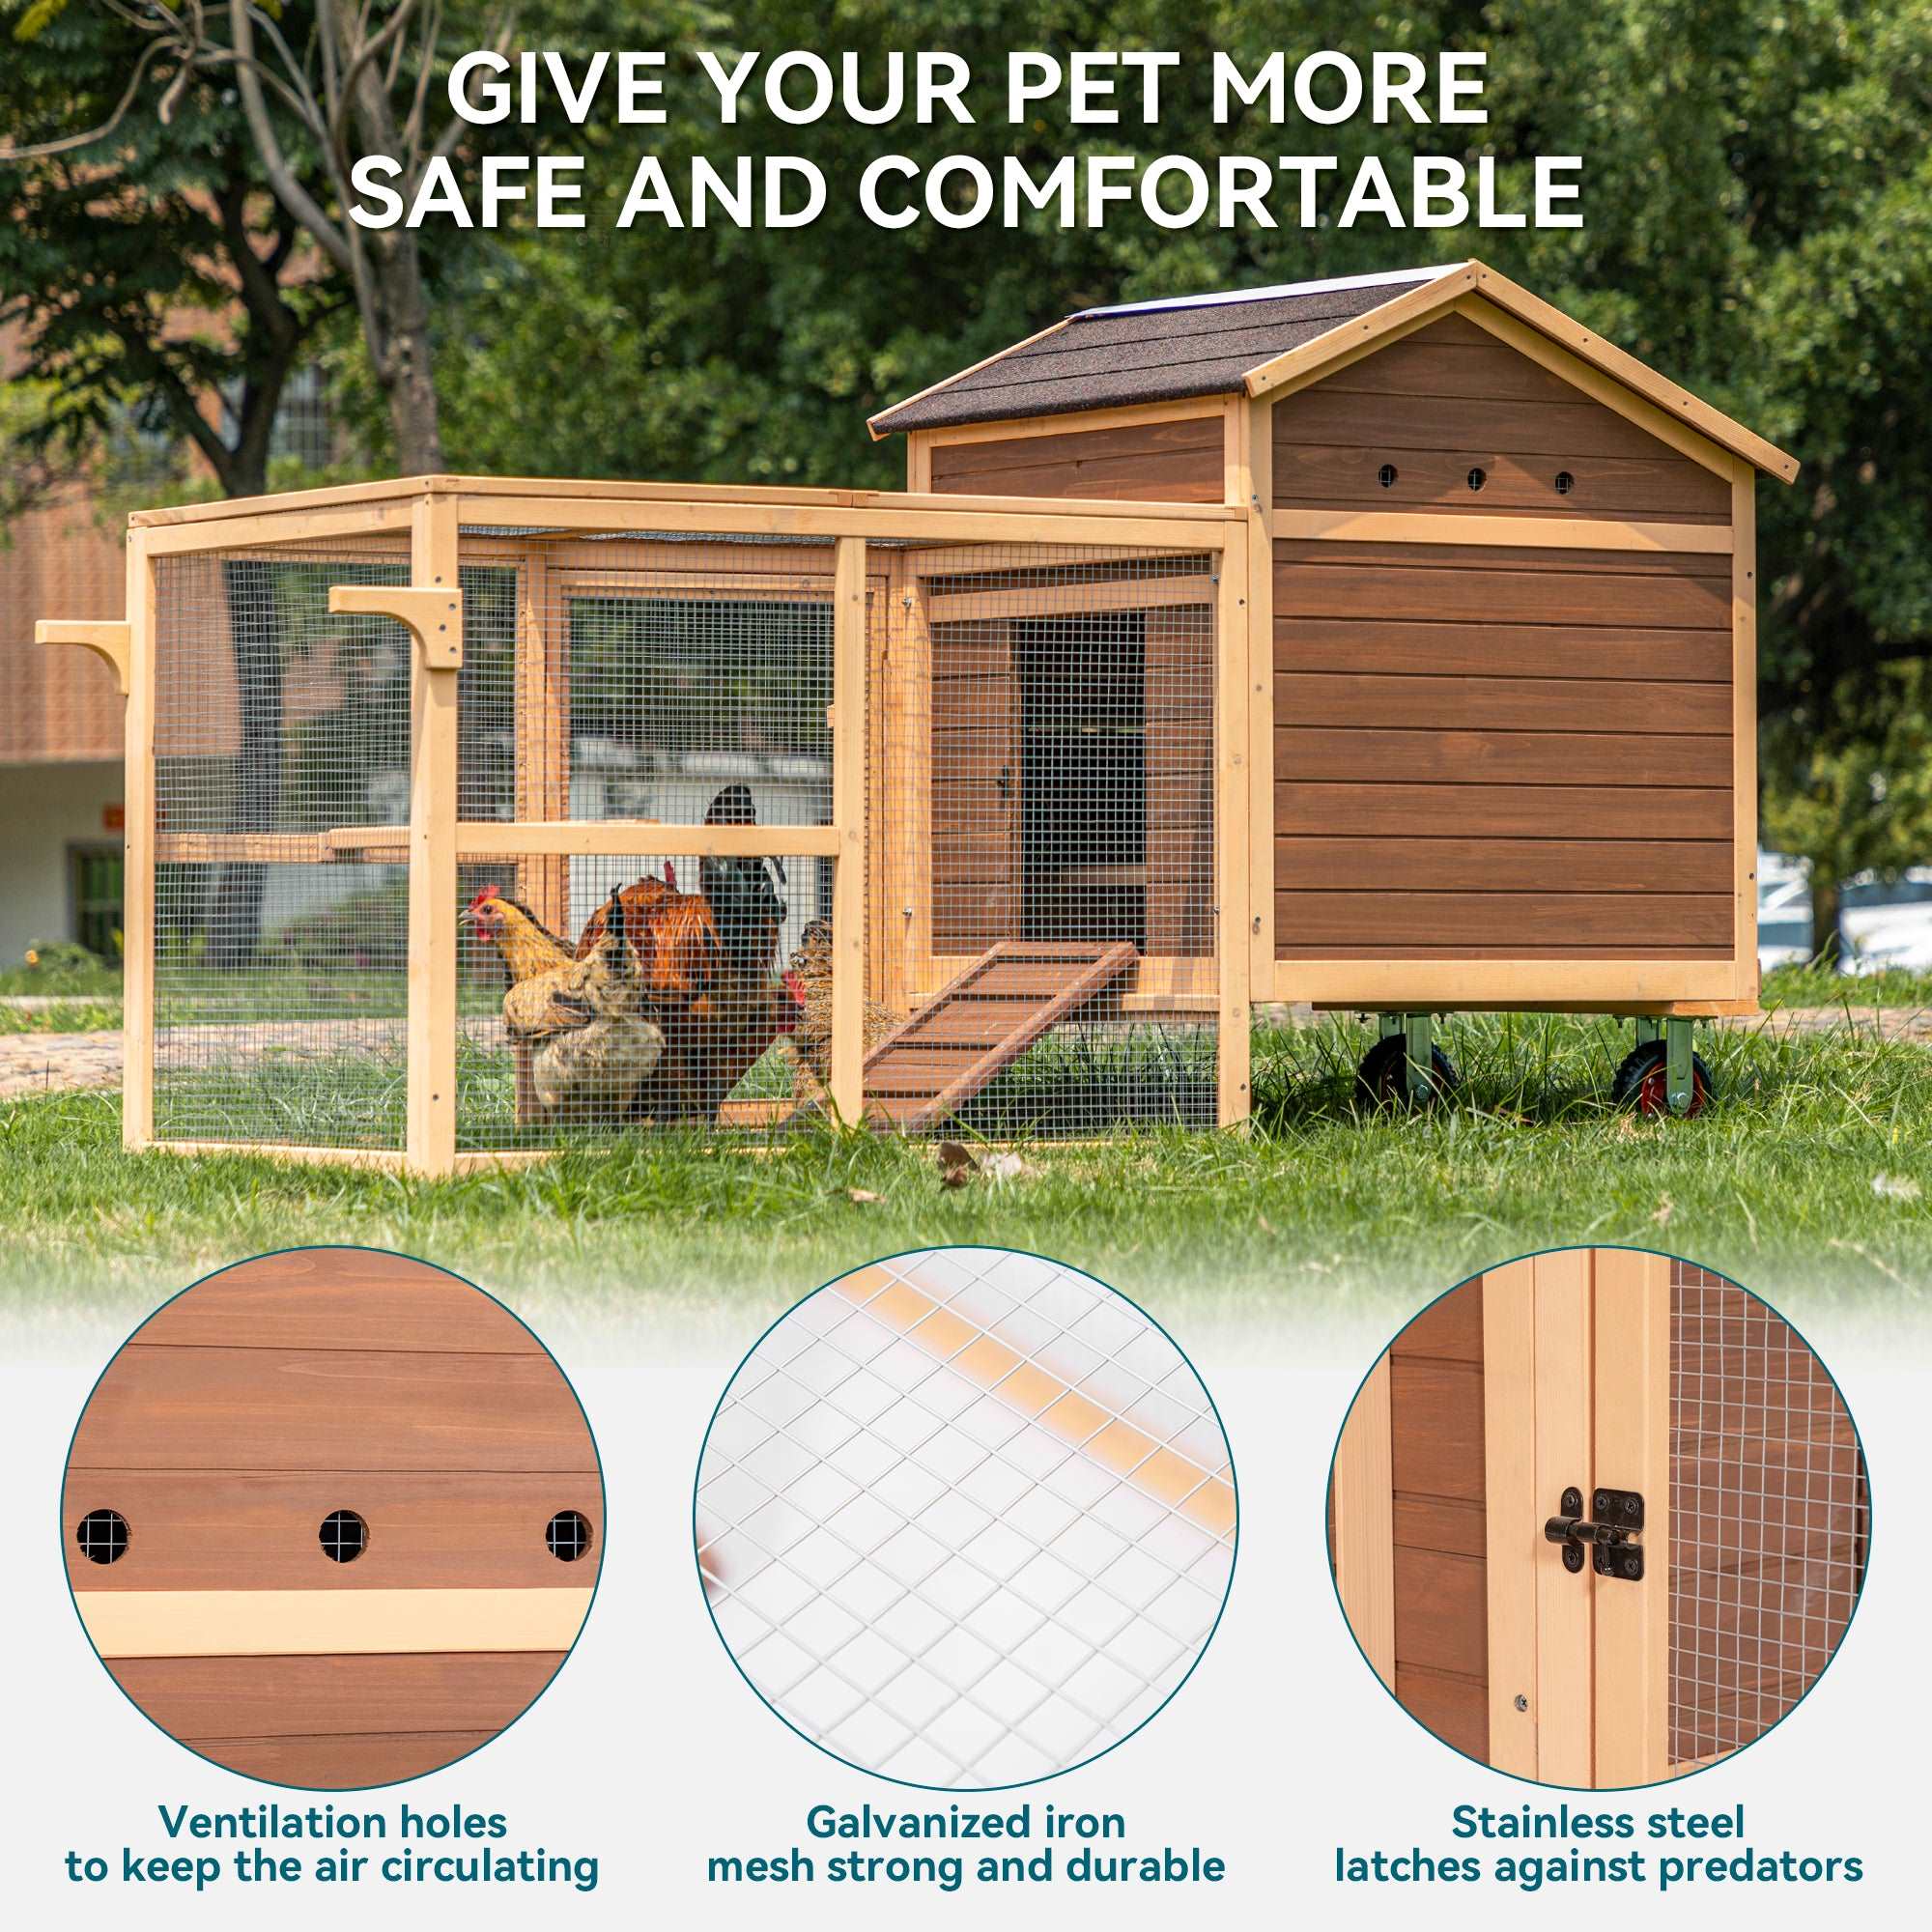 petsfit-large-chicken-coop-tractor-81-hen-house-outdoor-waterproof-poultry-cage-with-nesting-box-wheels-5-access-areas-pull-out-tray-for-easy-cleaning-04